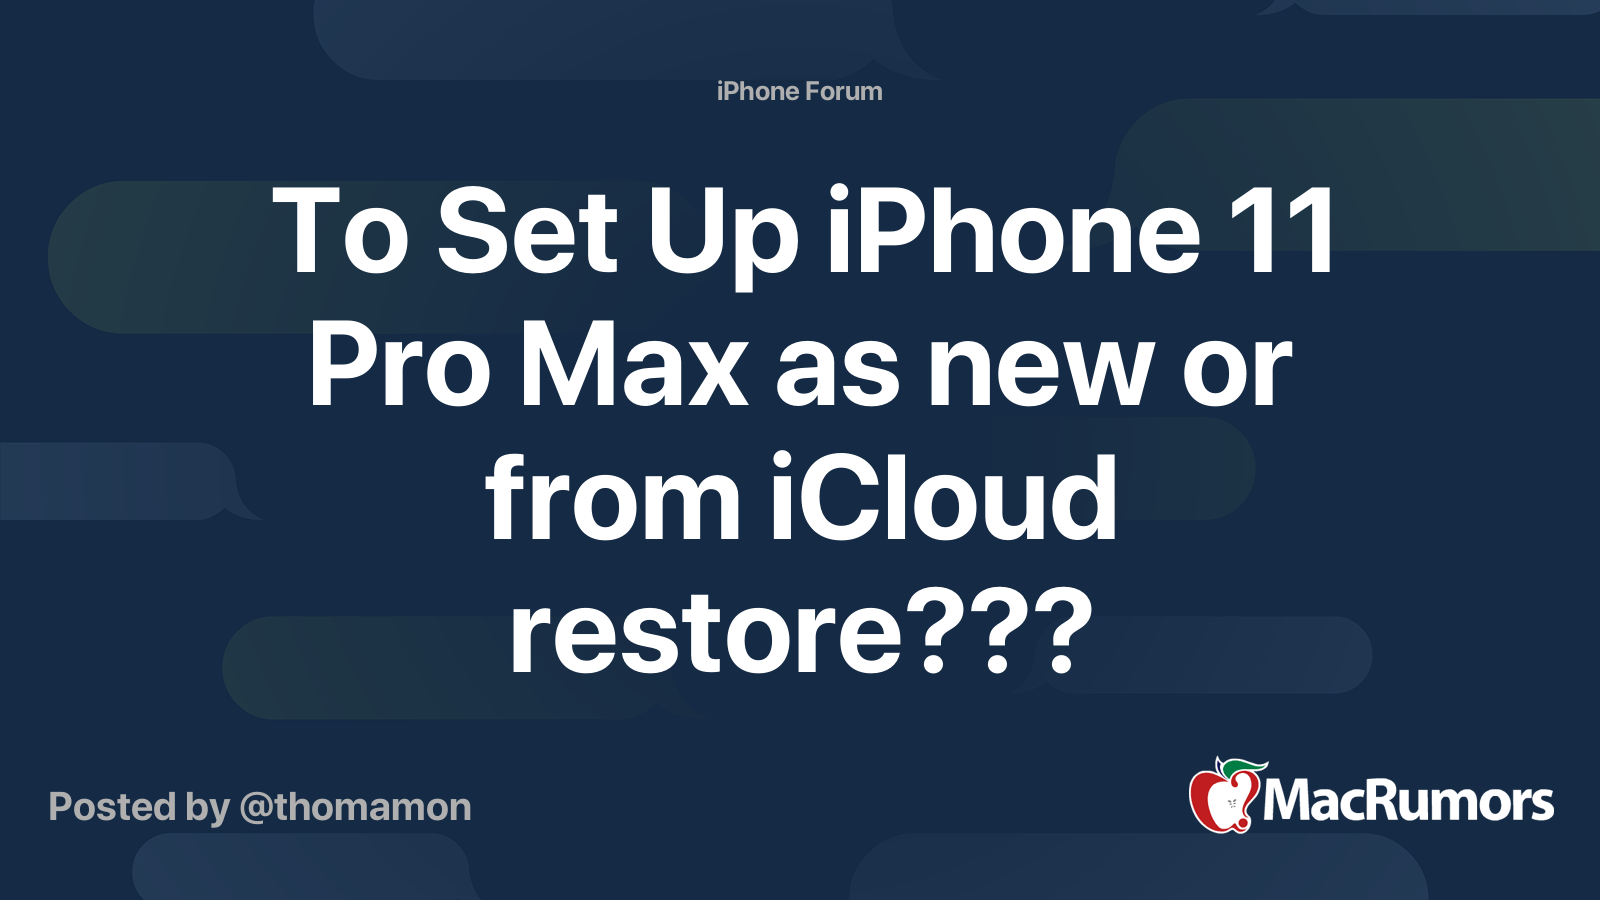 To Set Up iPhone 11 Pro Max as new or from iCloud restore